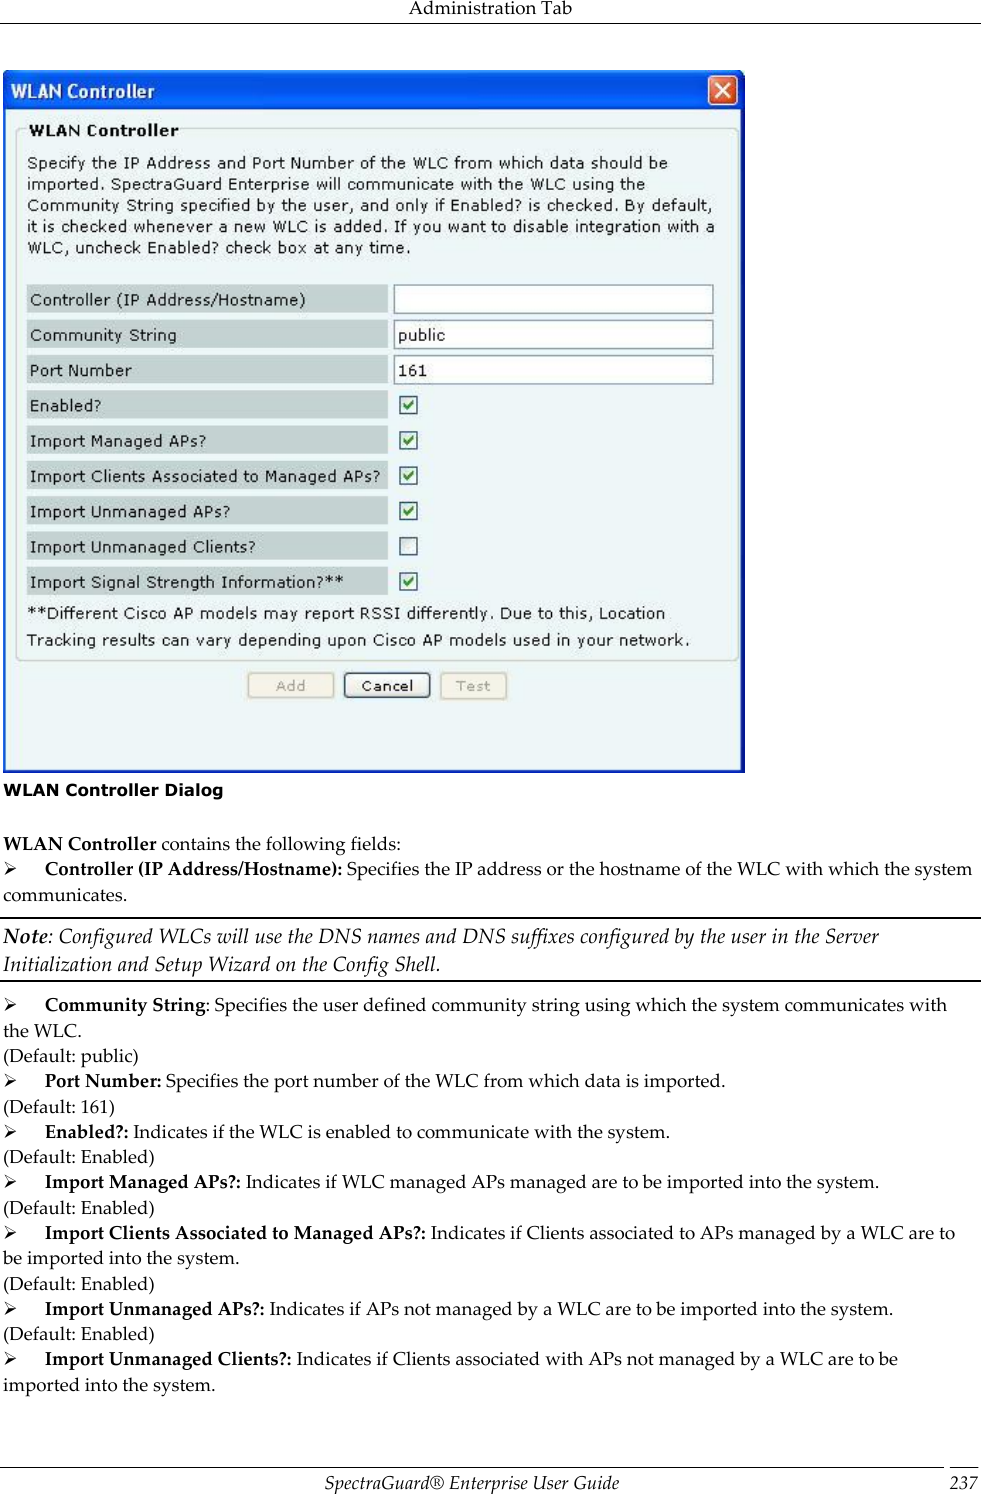 Administration Tab SpectraGuard®  Enterprise User Guide 237  WLAN Controller Dialog   WLAN Controller contains the following fields:        Controller (IP Address/Hostname): Specifies the IP address or the hostname of the WLC with which the system communicates. Note: Configured WLCs will use the DNS names and DNS suffixes configured by the user in the Server Initialization and Setup Wizard on the Config Shell.        Community String: Specifies the user defined community string using which the system communicates with the WLC. (Default: public)        Port Number: Specifies the port number of the WLC from which data is imported. (Default: 161)        Enabled?: Indicates if the WLC is enabled to communicate with the system. (Default: Enabled)        Import Managed APs?: Indicates if WLC managed APs managed are to be imported into the system. (Default: Enabled)        Import Clients Associated to Managed APs?: Indicates if Clients associated to APs managed by a WLC are to be imported into the system. (Default: Enabled)        Import Unmanaged APs?: Indicates if APs not managed by a WLC are to be imported into the system. (Default: Enabled)        Import Unmanaged Clients?: Indicates if Clients associated with APs not managed by a WLC are to be imported into the system. 